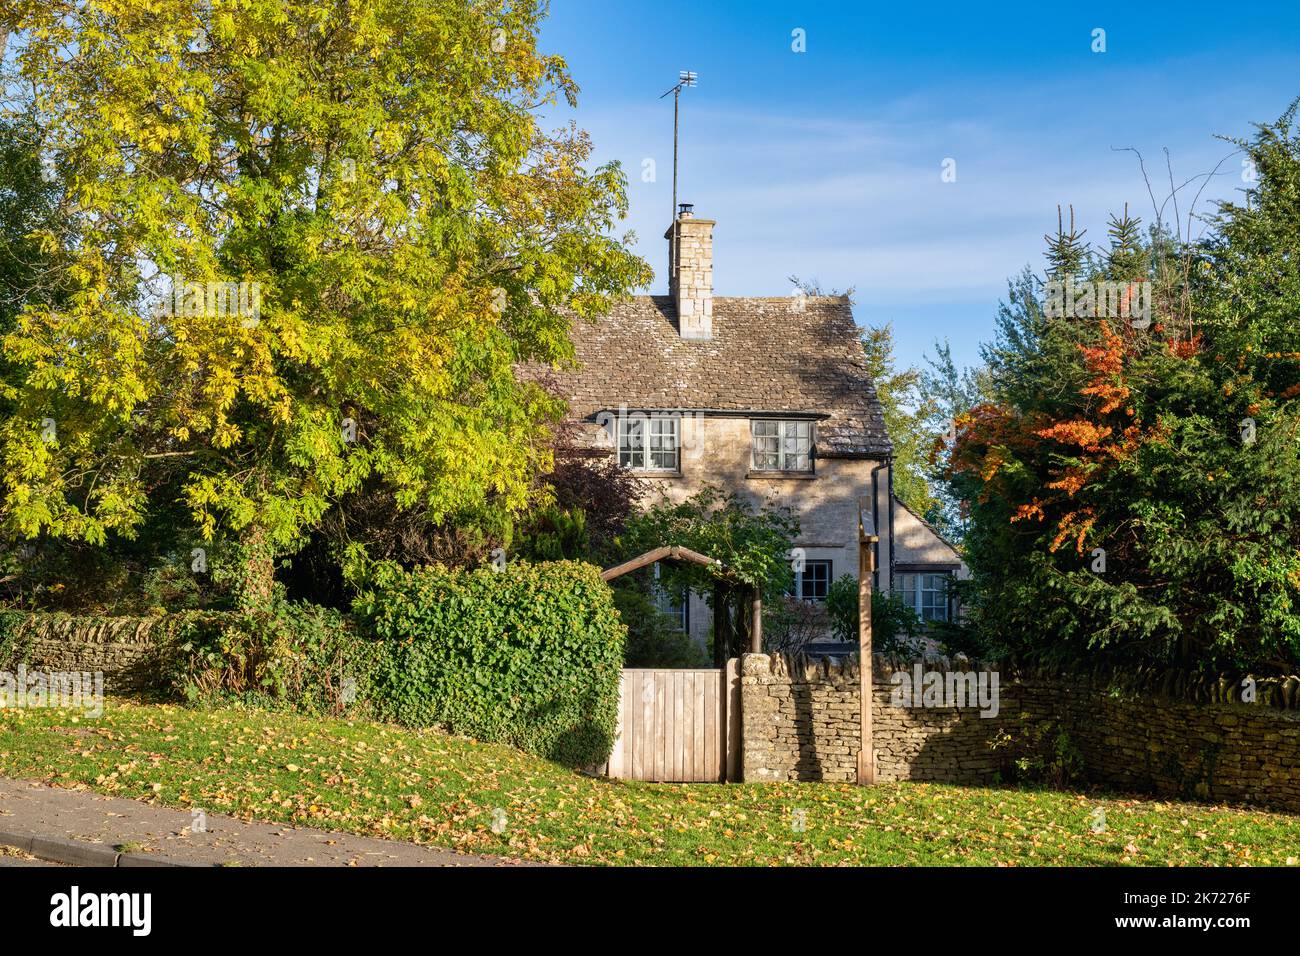 Cotswold Ferienhaus am Nachmittag Herbstsonne. Burford, Cotswolds, Oxfordshire, England Stockfoto